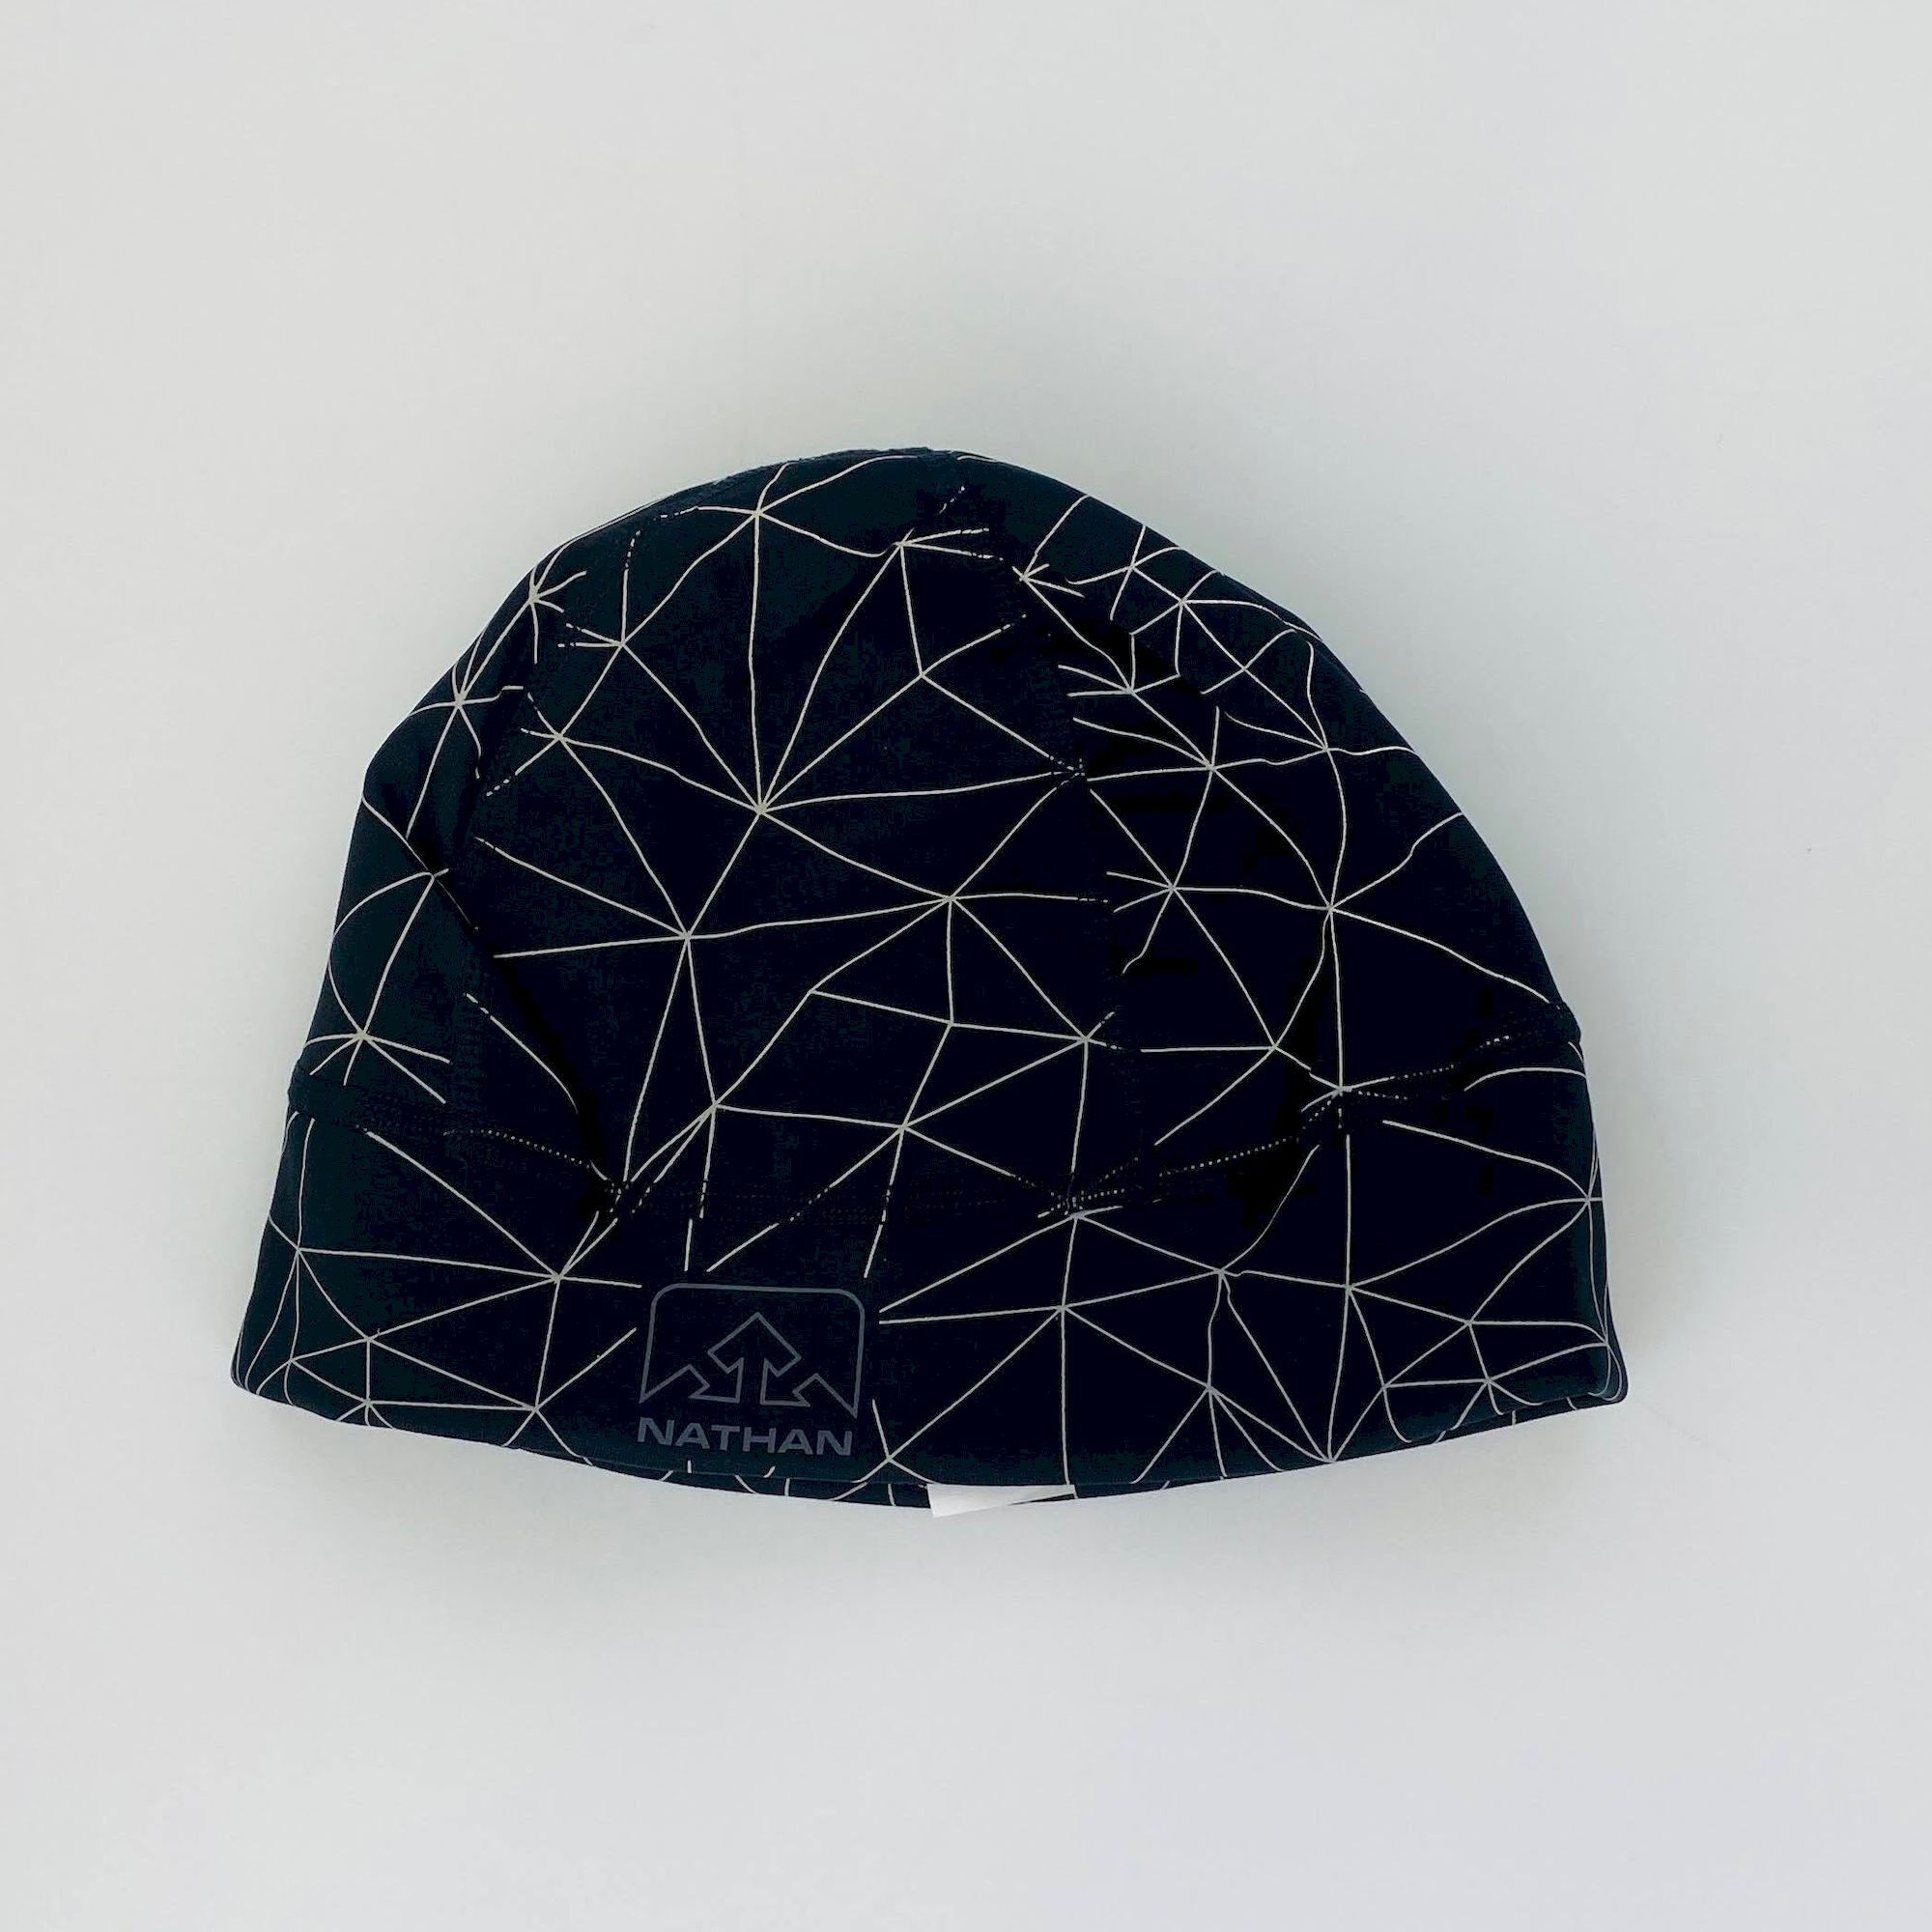 Nathan HyperNight Reflective Pony-Tail - Second Hand Beanie - Black - One Size | Hardloop